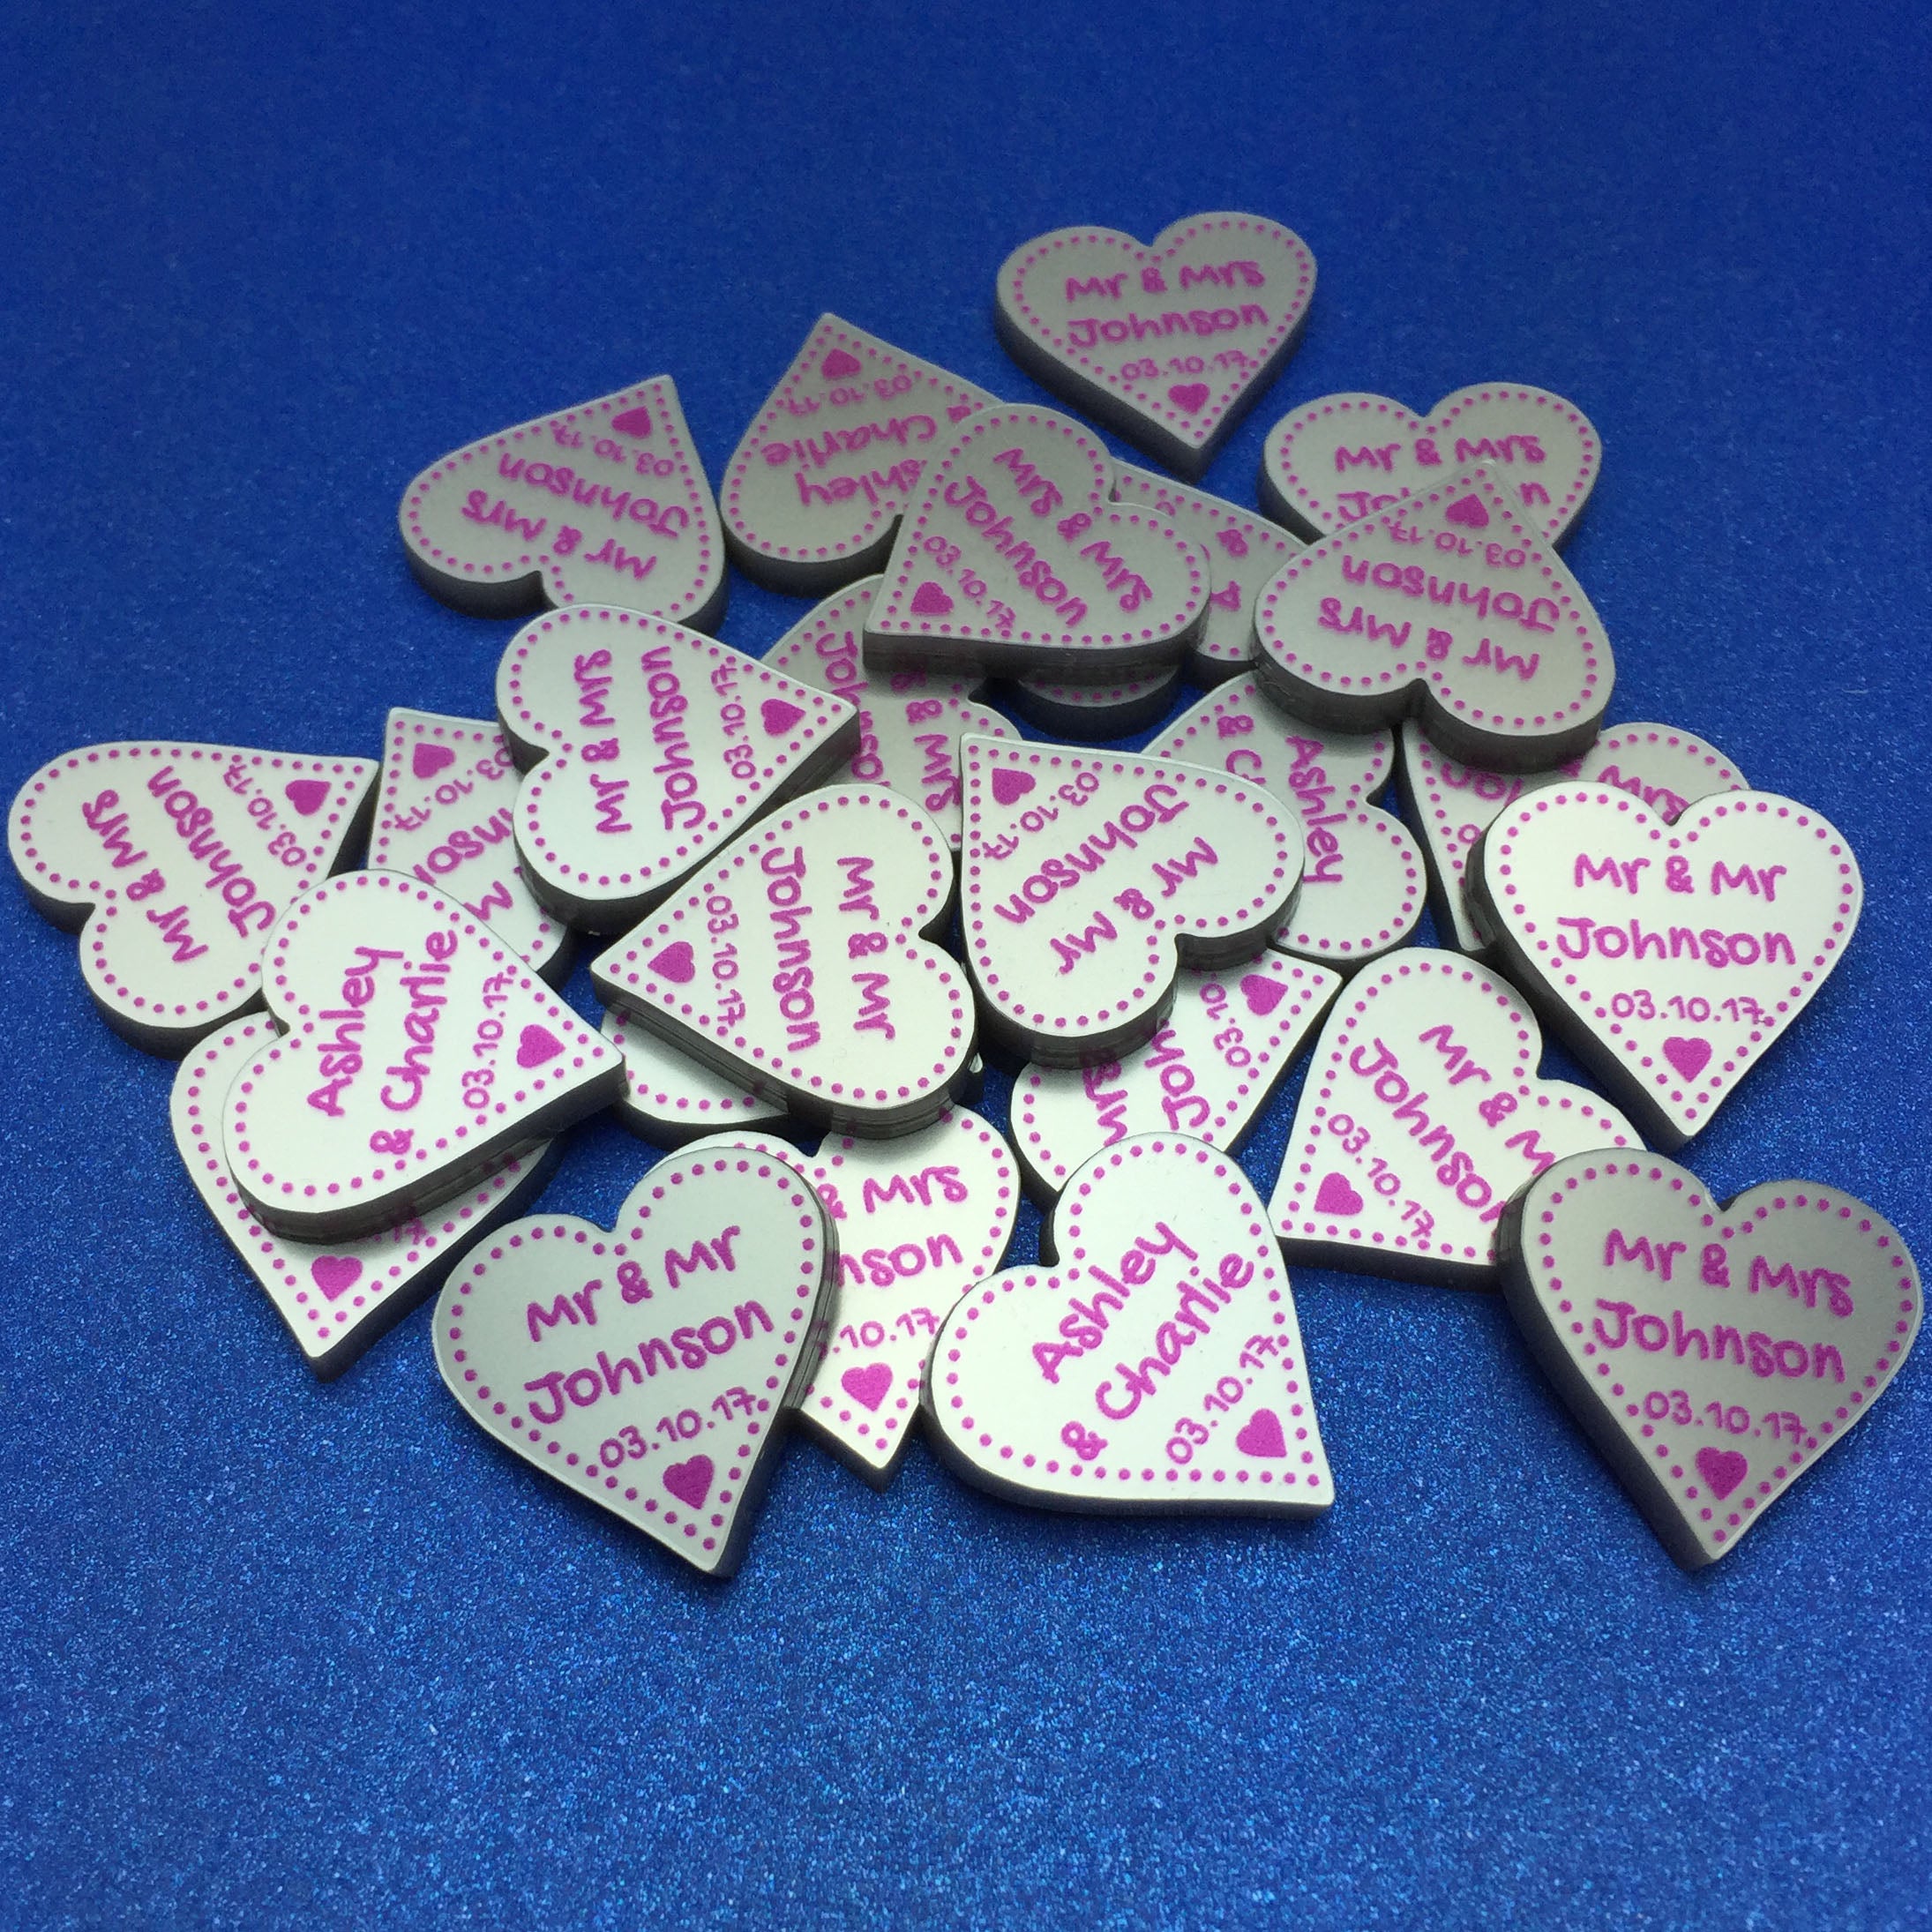 Personalised Wedding Favours - Metallic Silver Acrylic + Pink Dotty Love Hearts